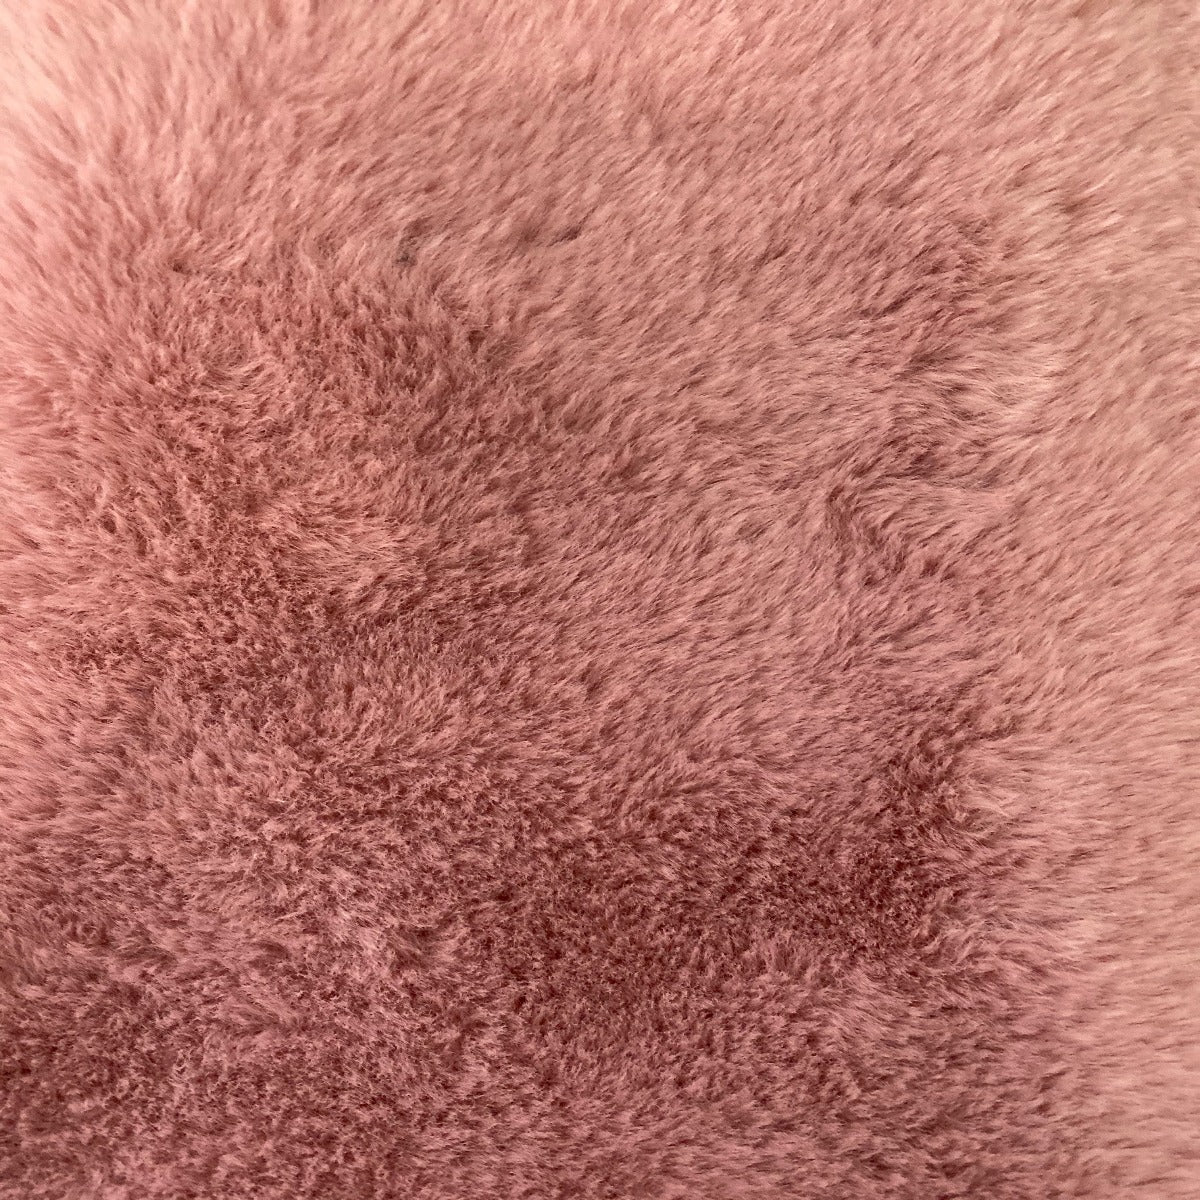 Super soft taupe rabbit style faux fur fabric - 2R333 Taupe